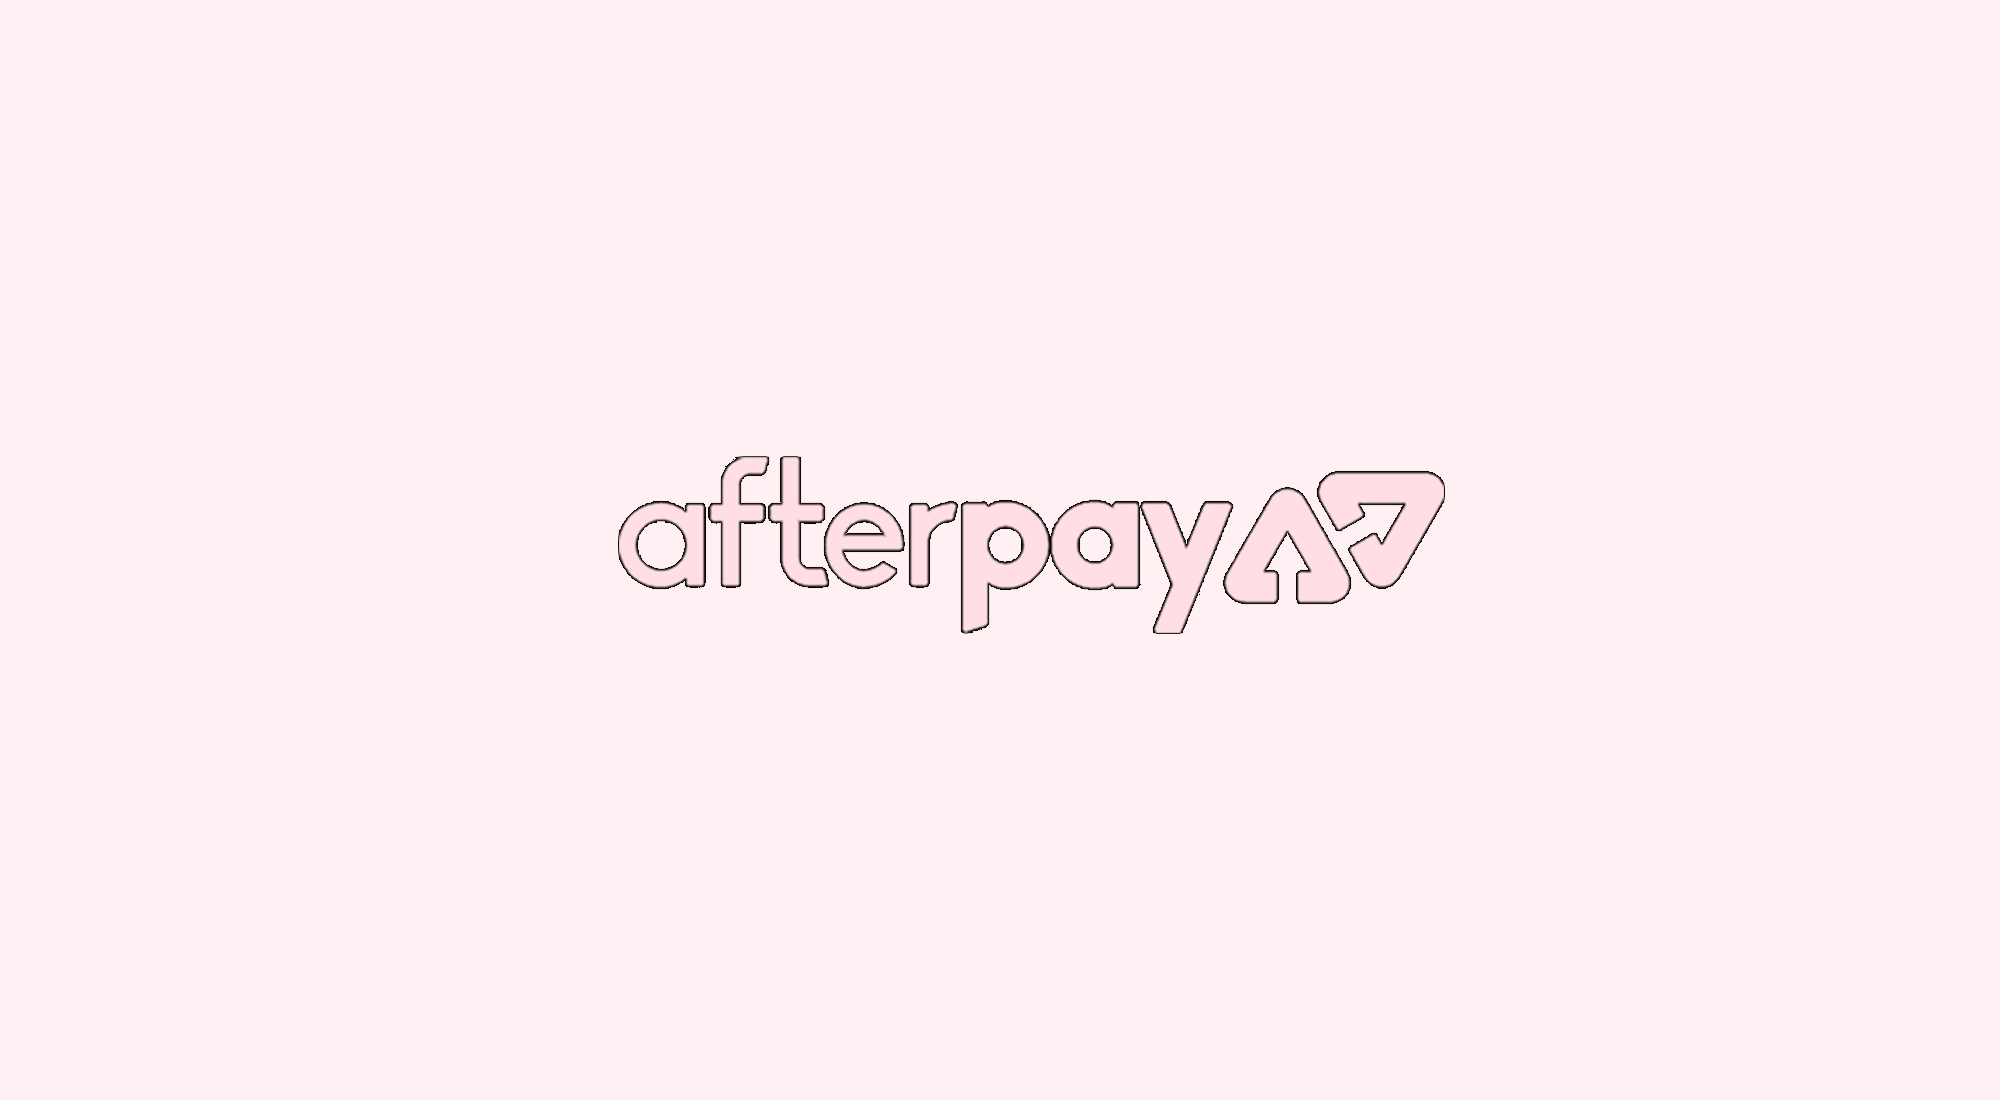 What is Afterpay and How Does it Work?